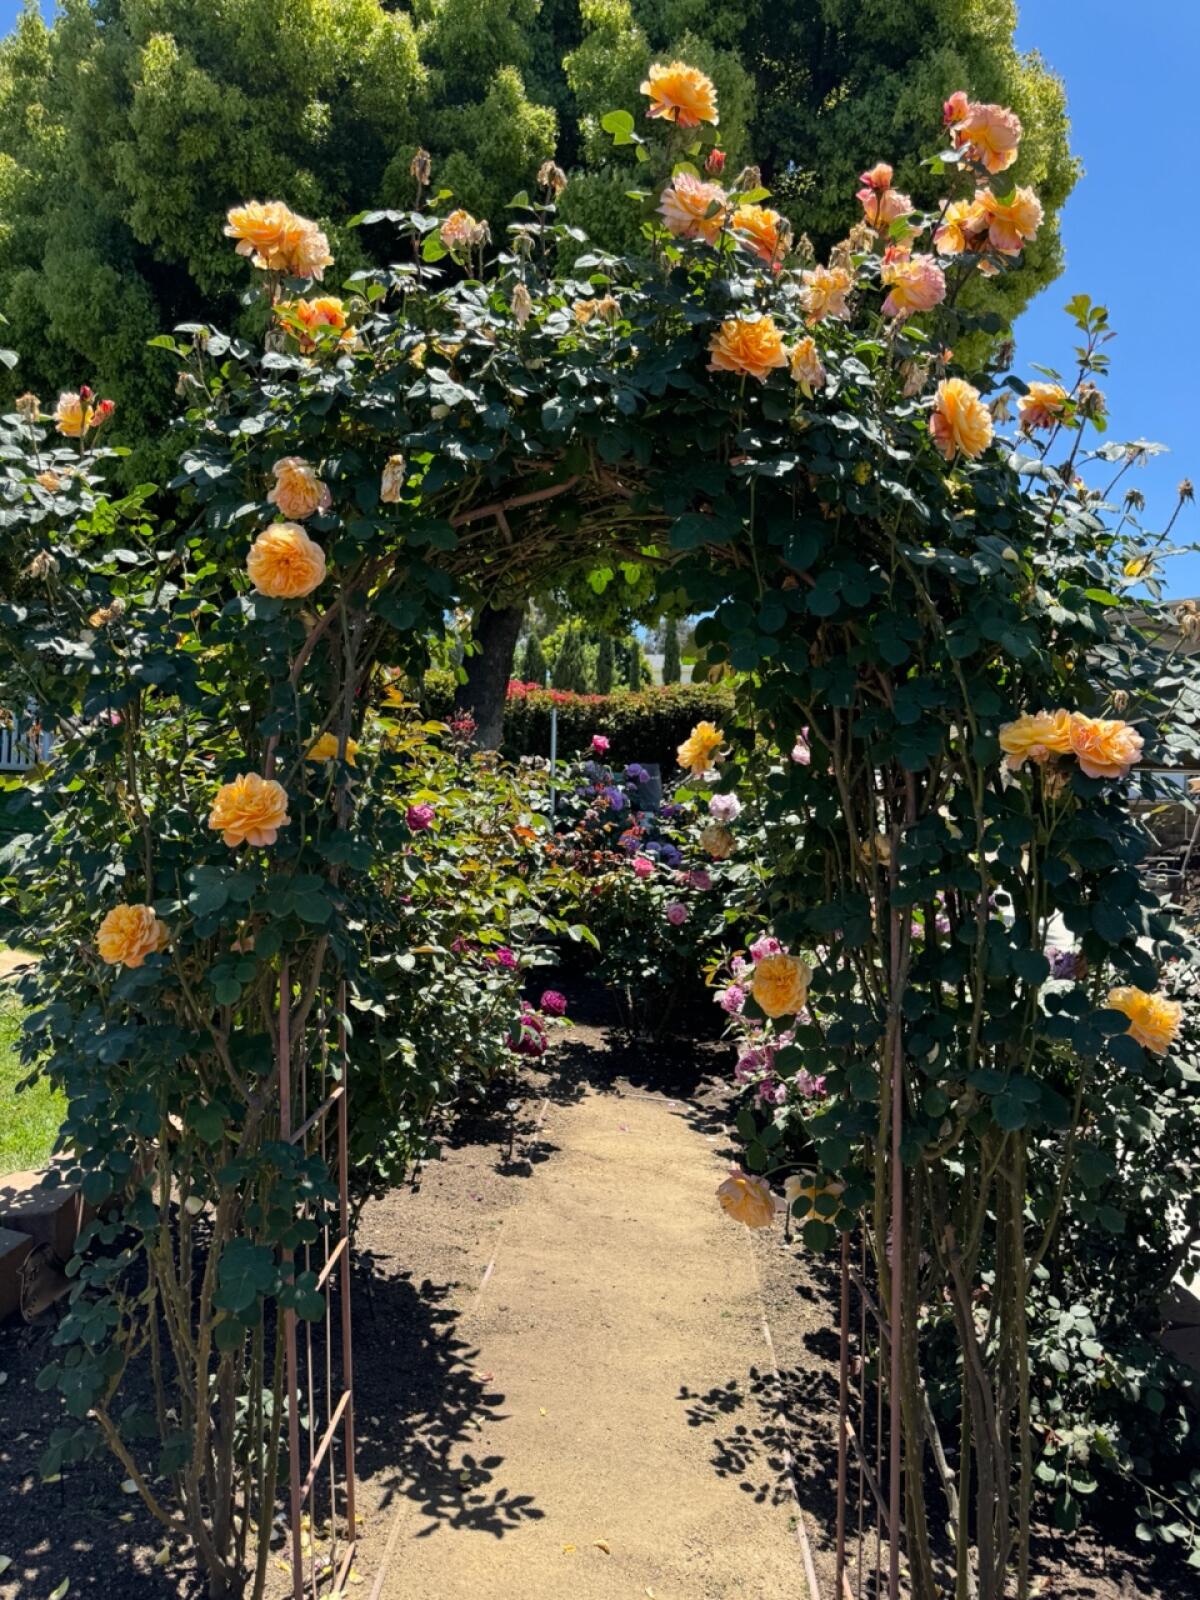 An archway is adorned with ‘The Impressionist’ in the Russells’ beautifully maintained Crest rose garden.